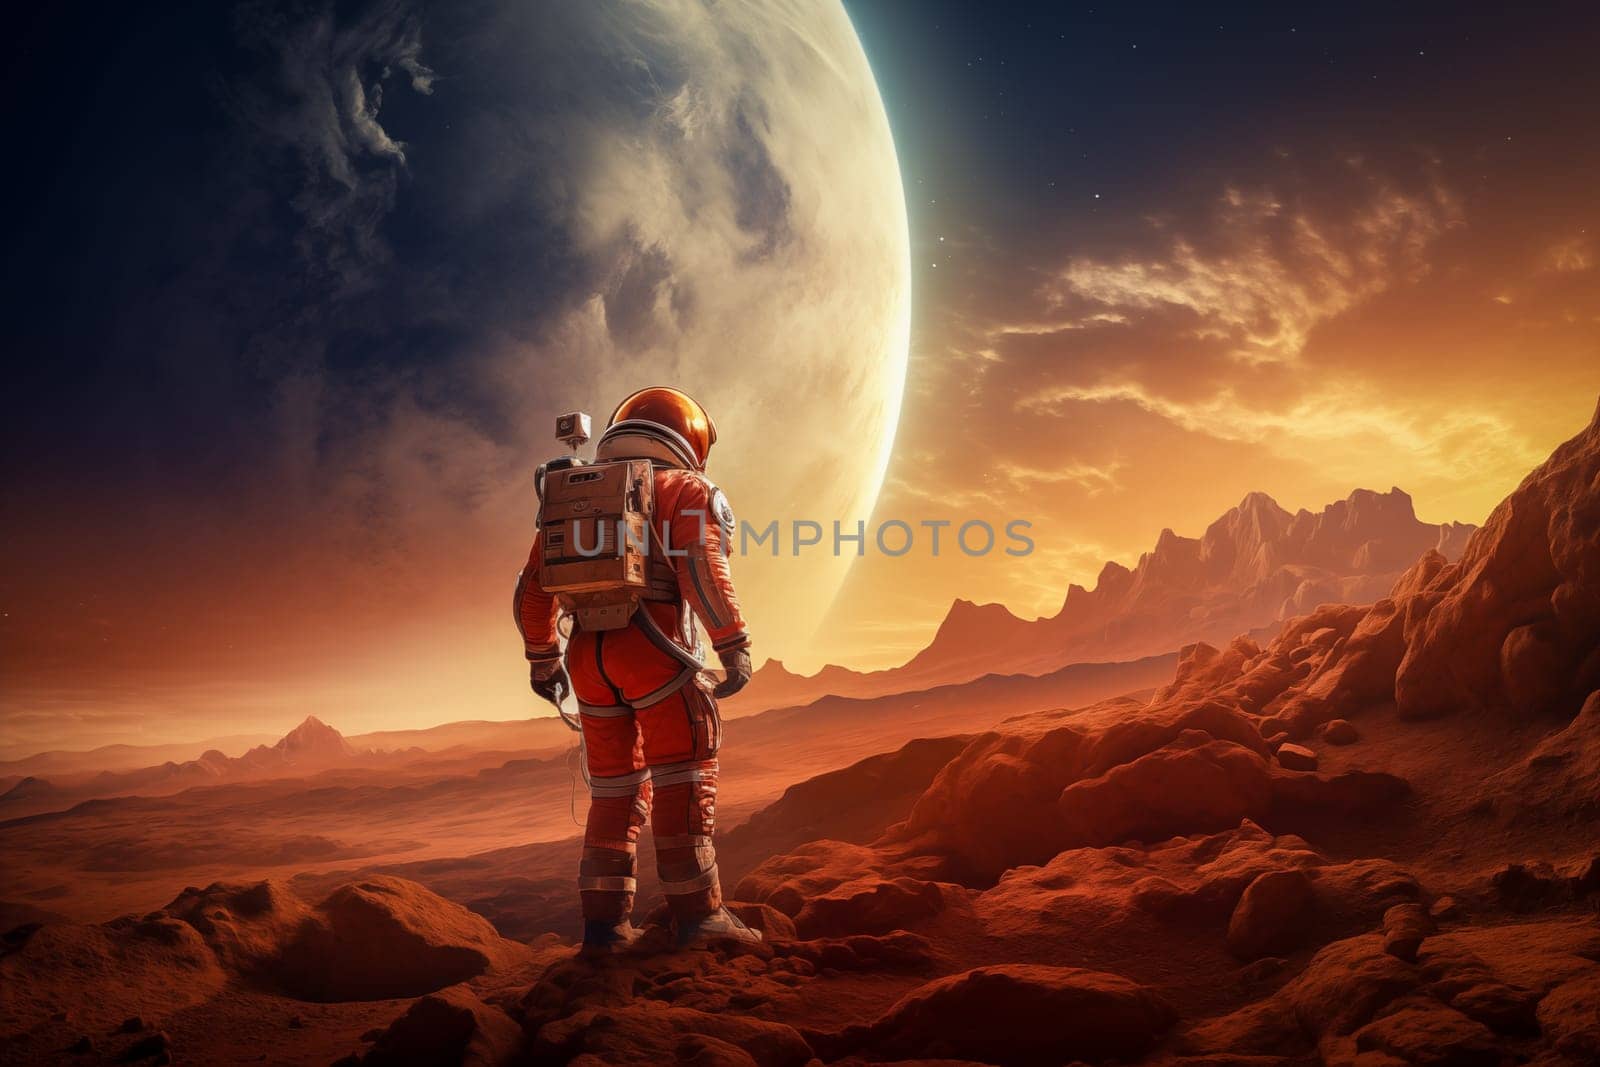 Astronaut Walking on Mars with Mountains and Moon in Background by dimol